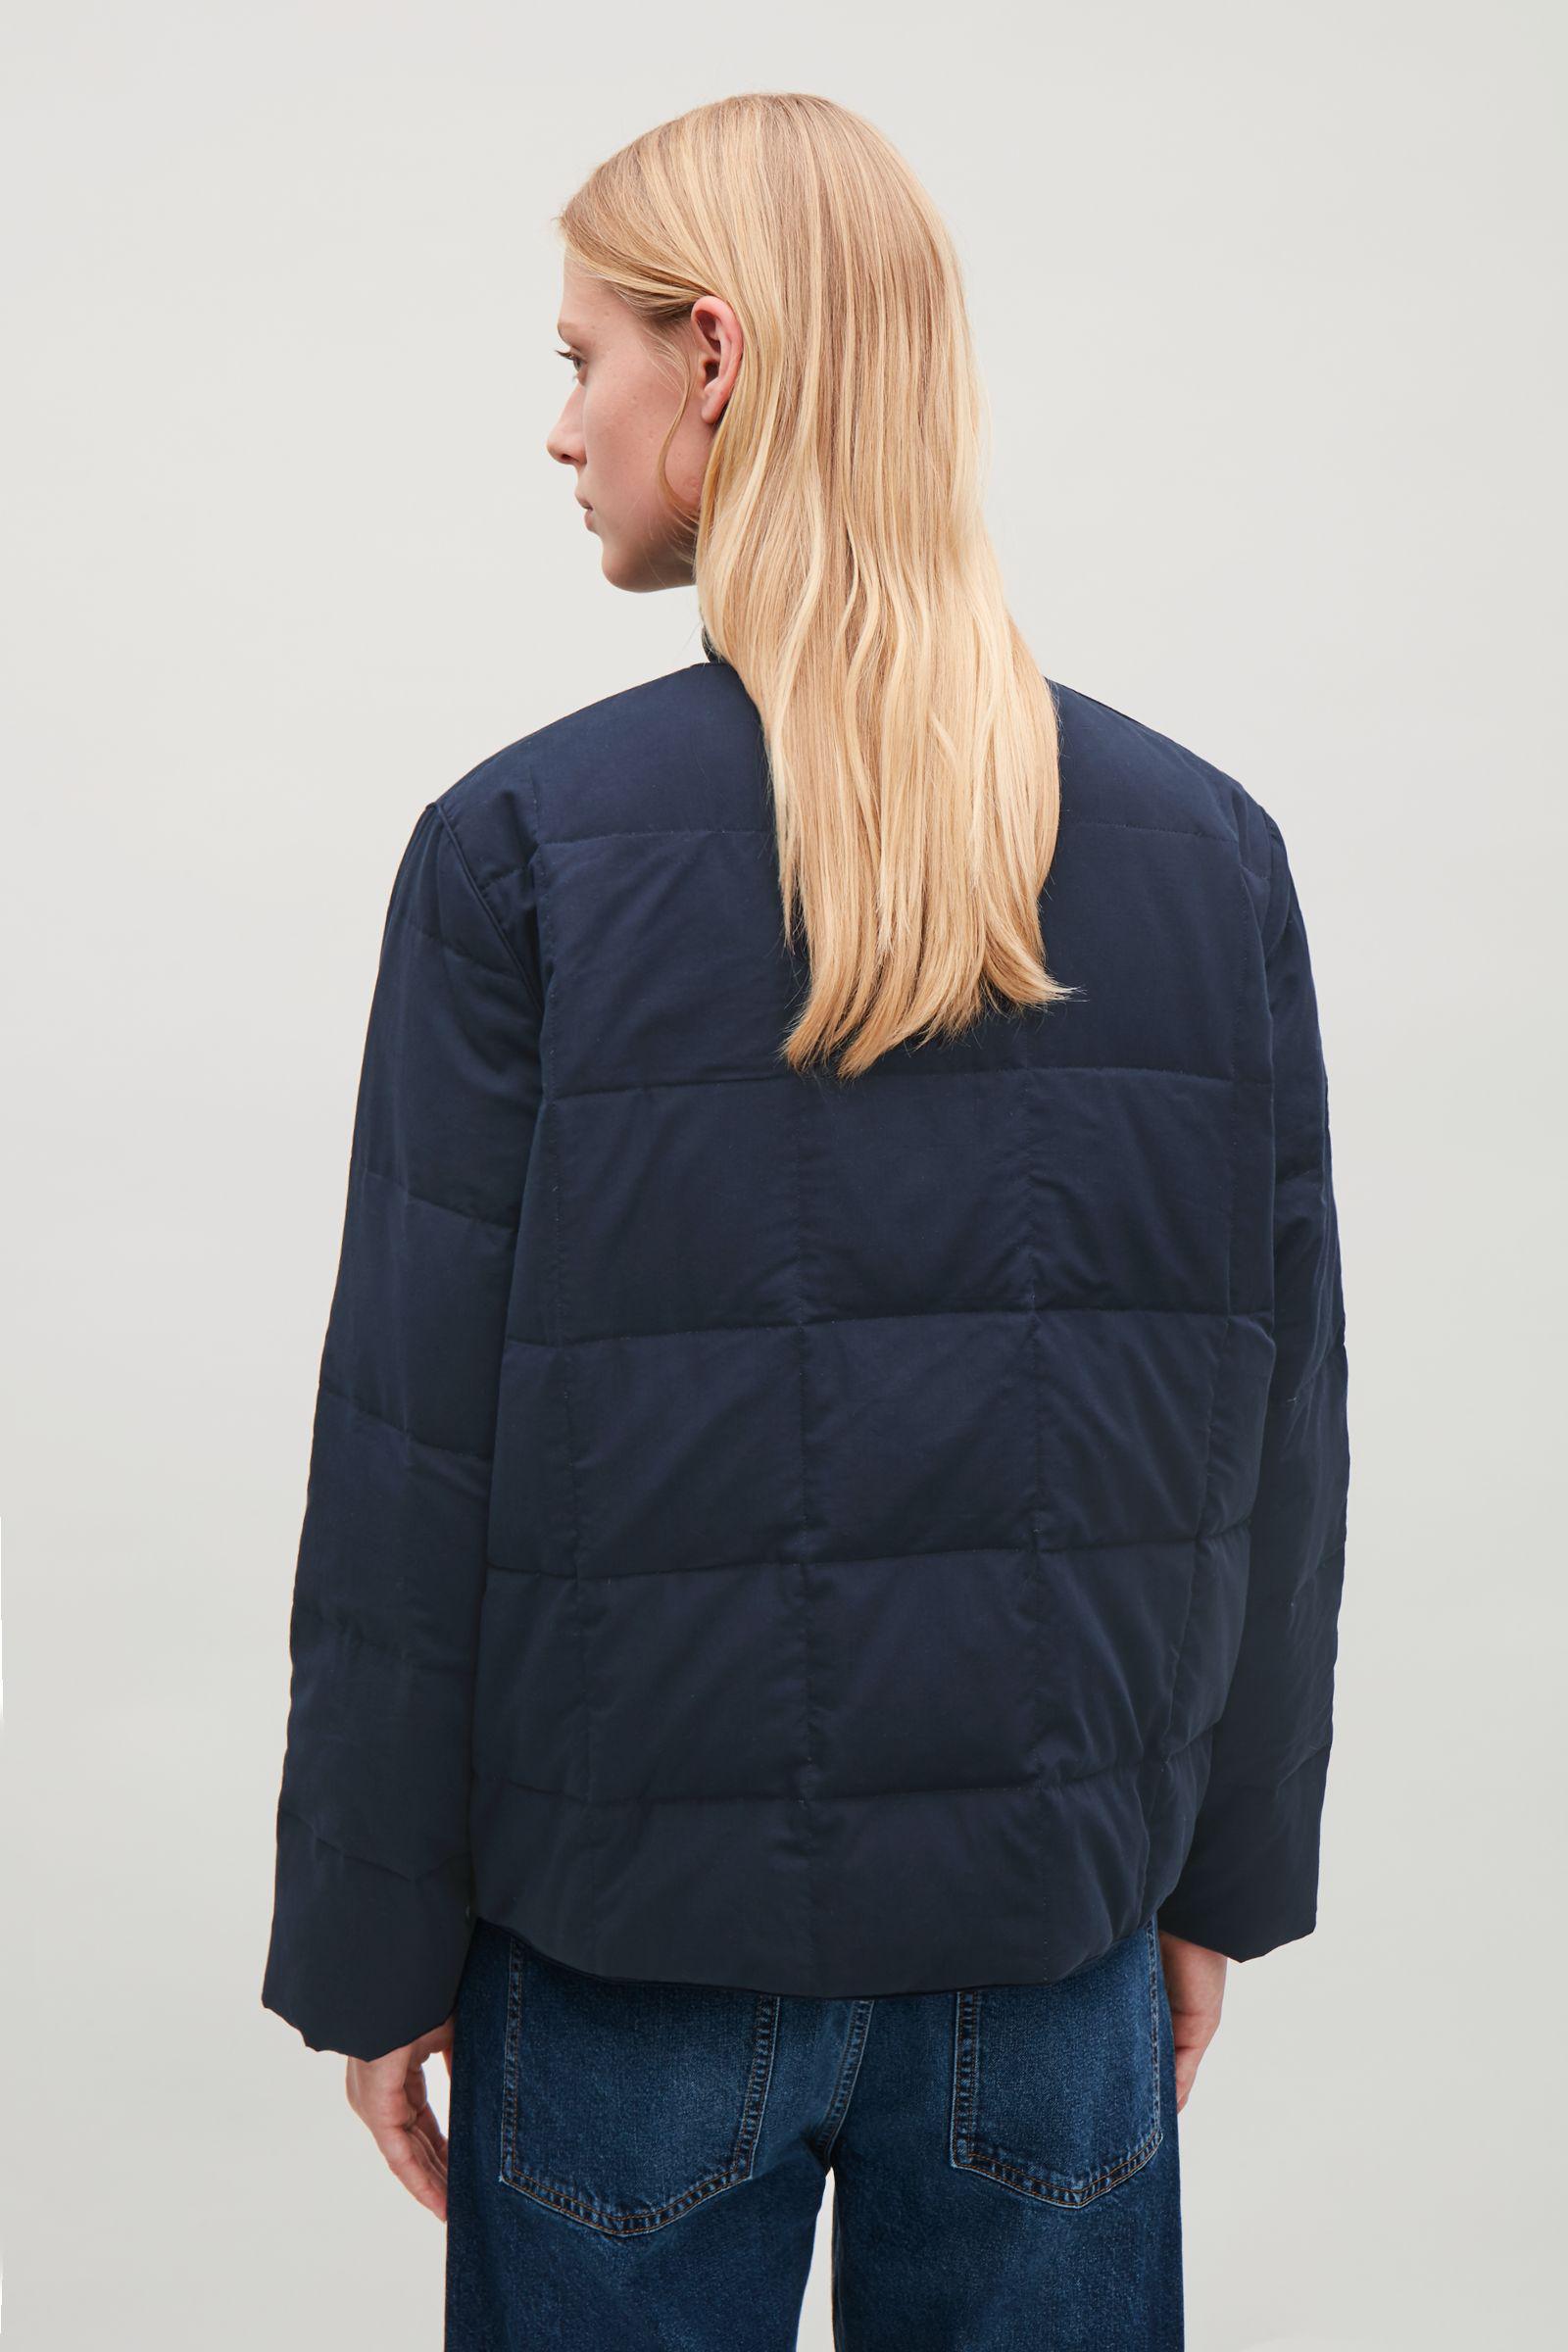 COS Grey Quilted Light Jacket Age 7 